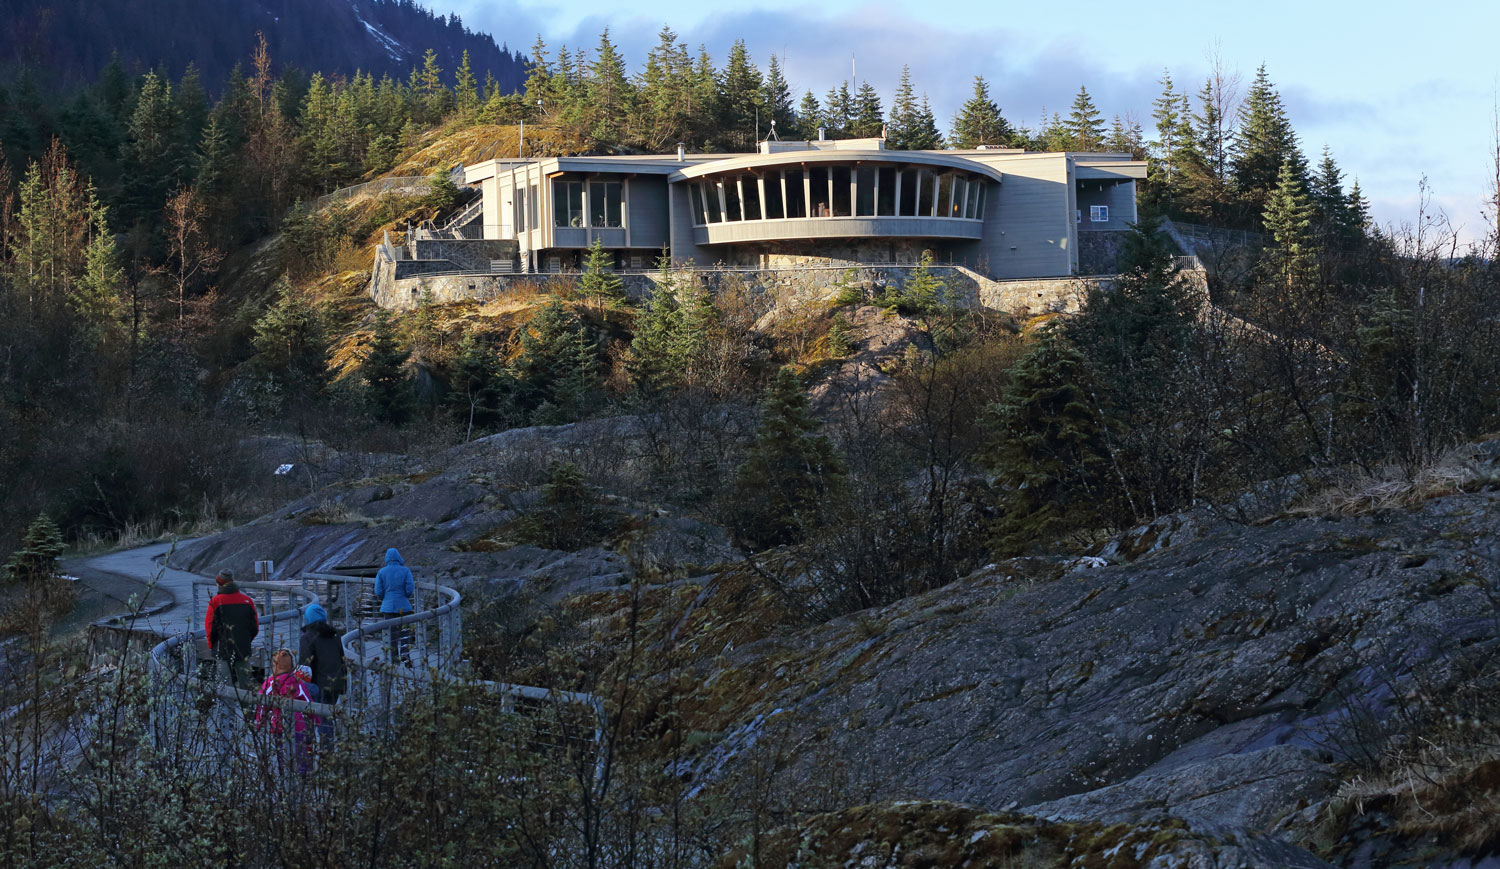 Mendenhall Glacier Visitor's Center on a chilly morning in the springtime.